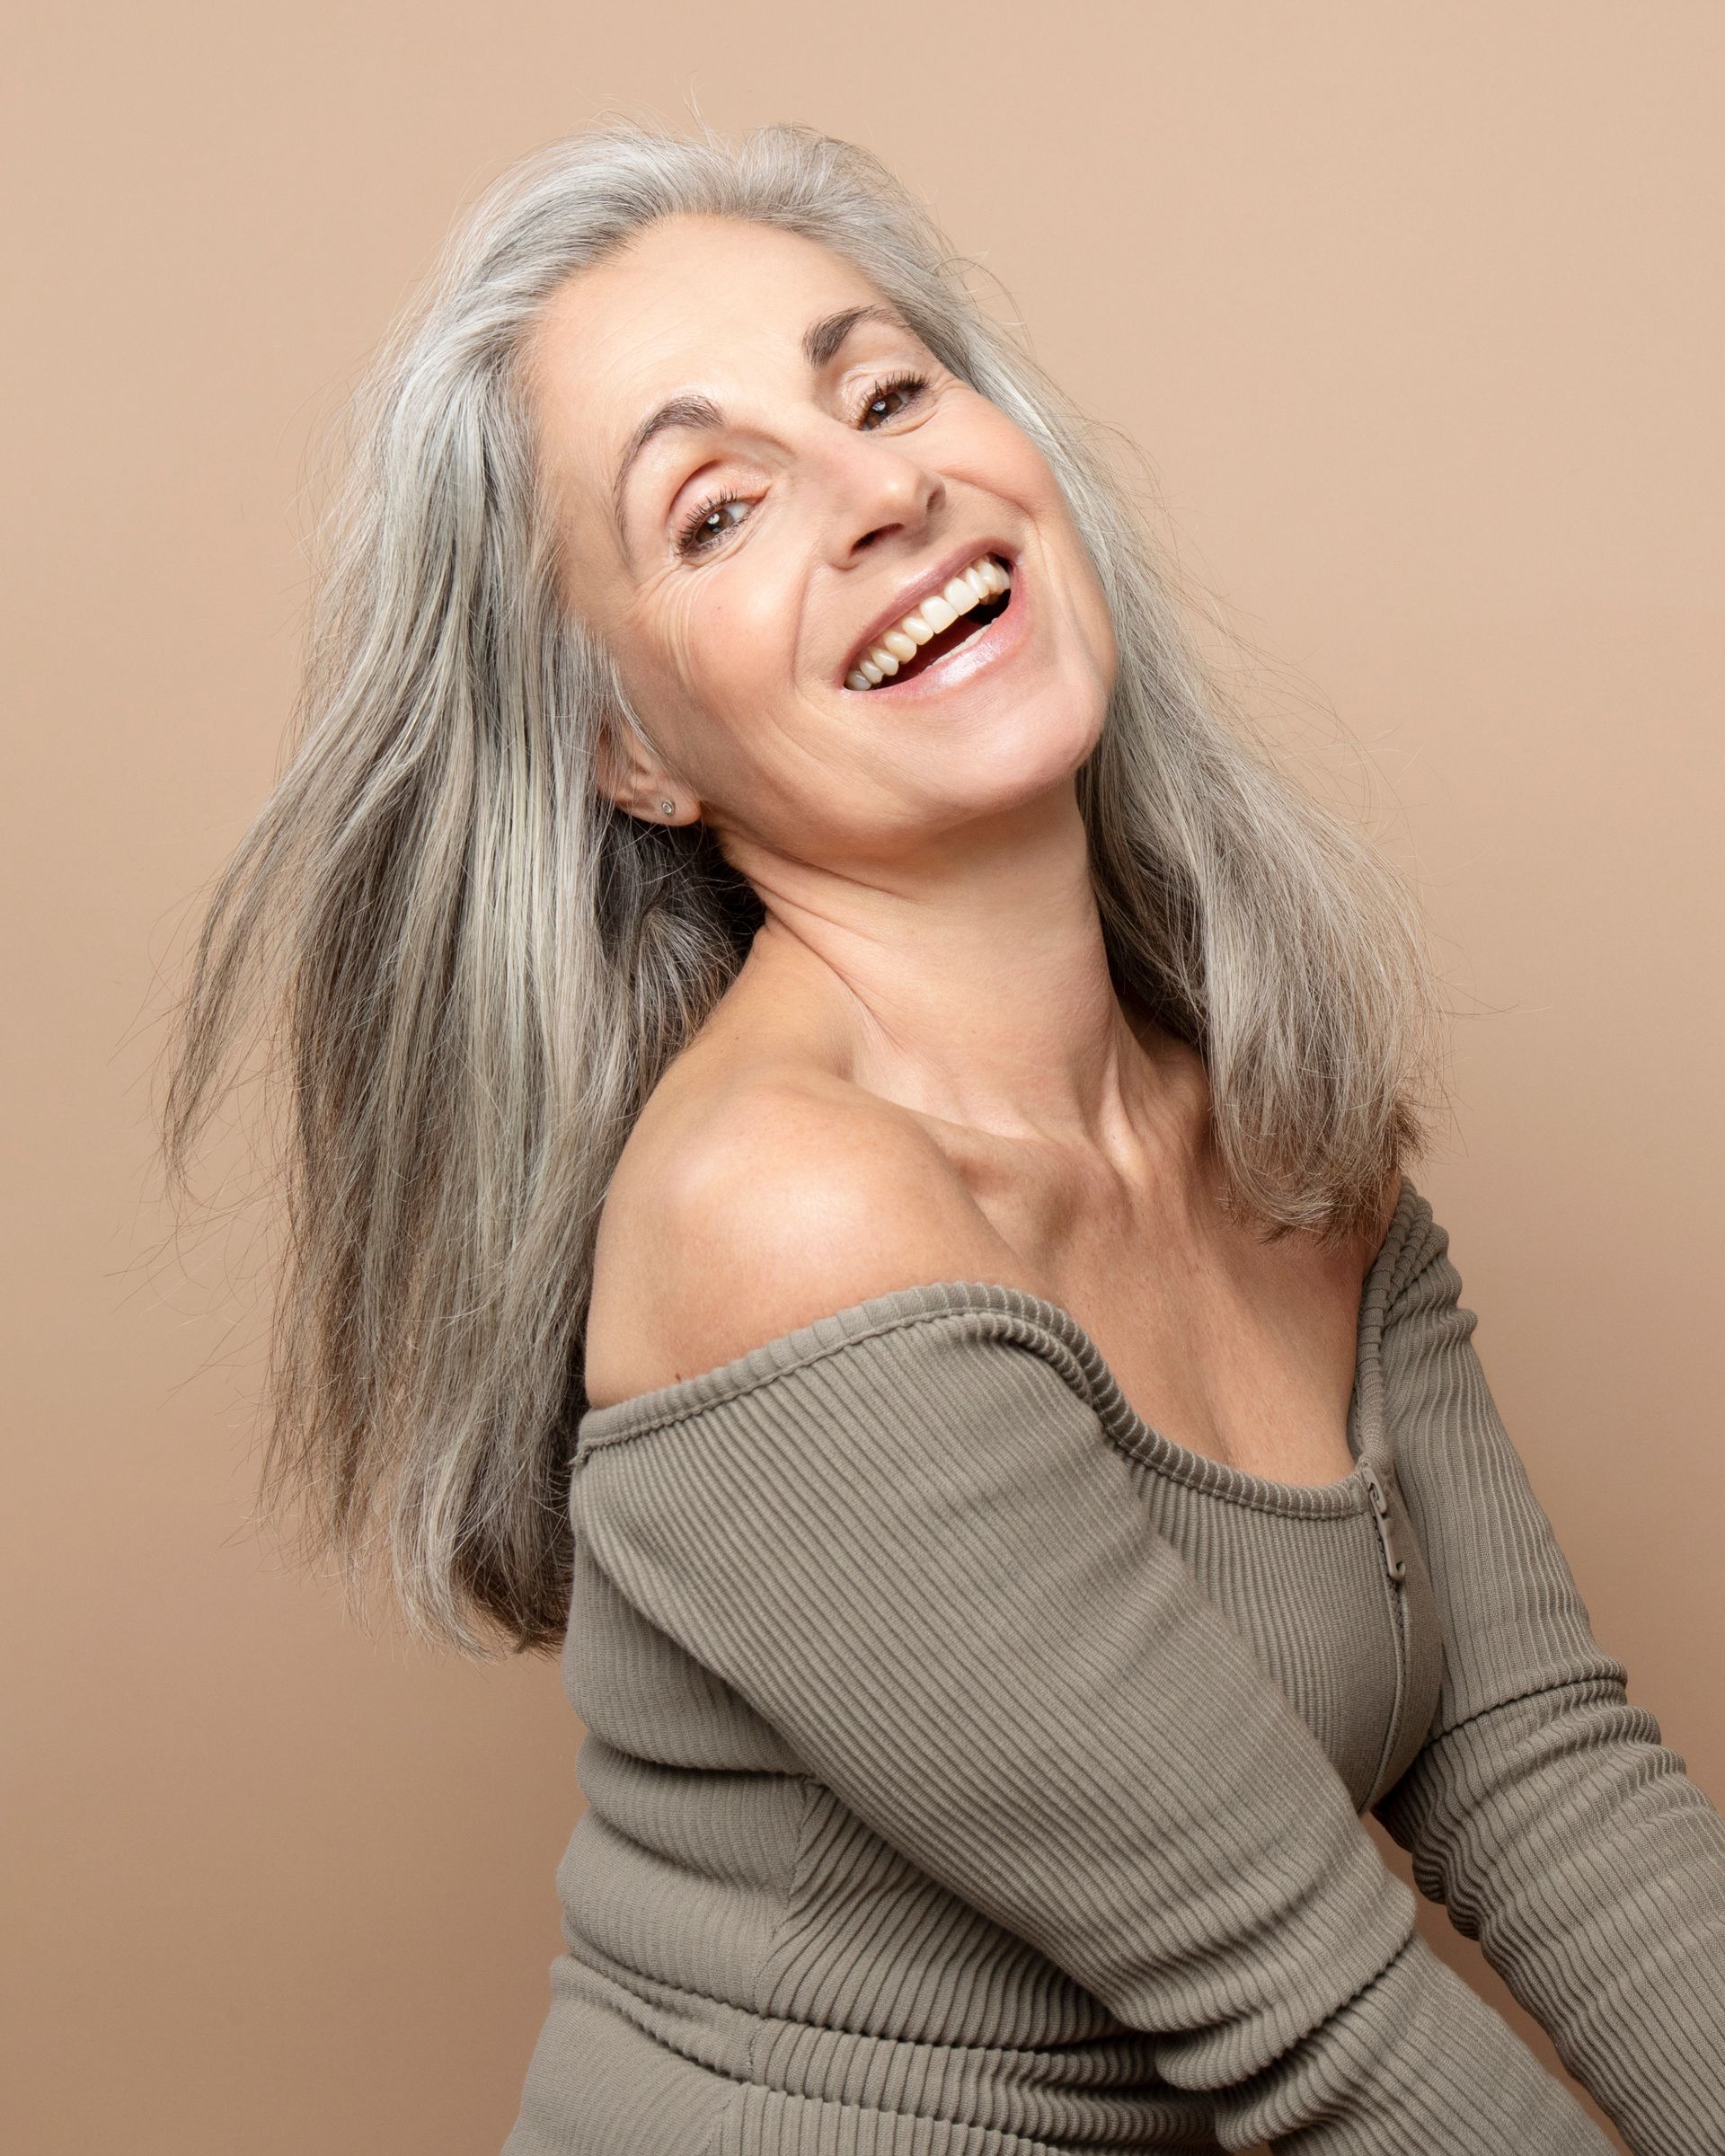 A woman with gray hair is smiling and wearing a sweater.